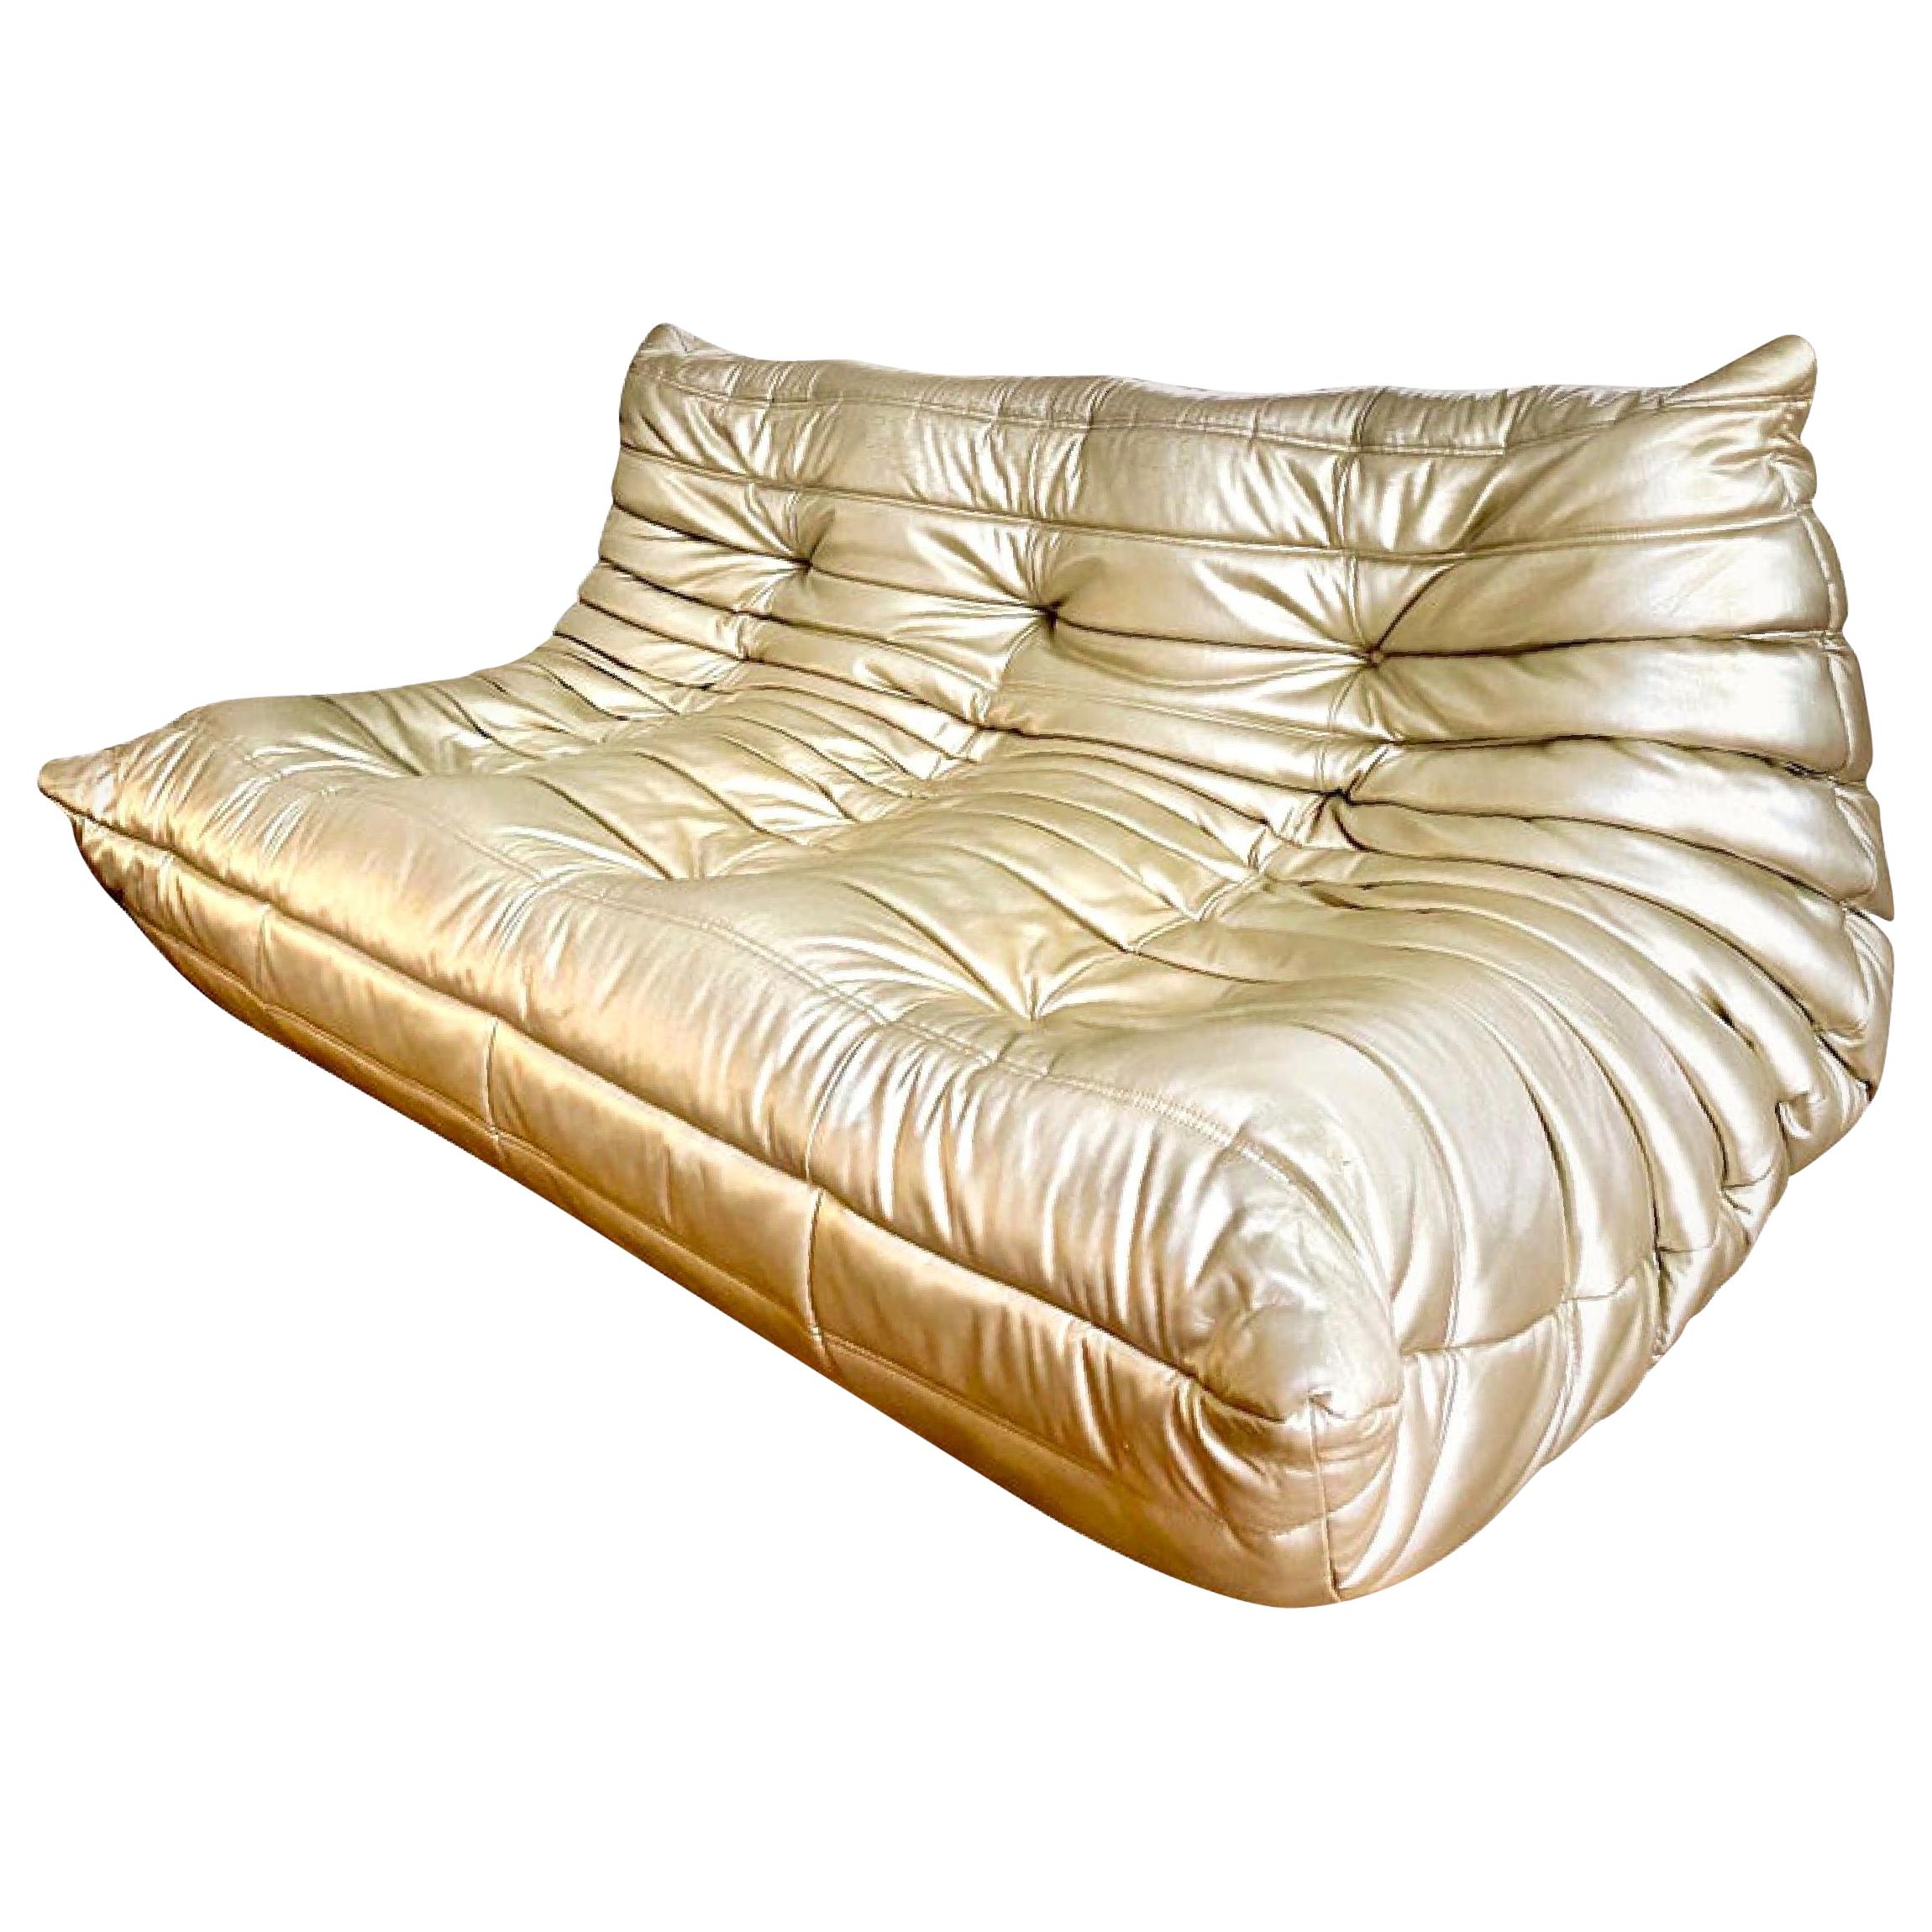 Michel Ducaroy for Ligne Roset Togo Three-Seat Sofa, Limited Edition, Gold 1990s